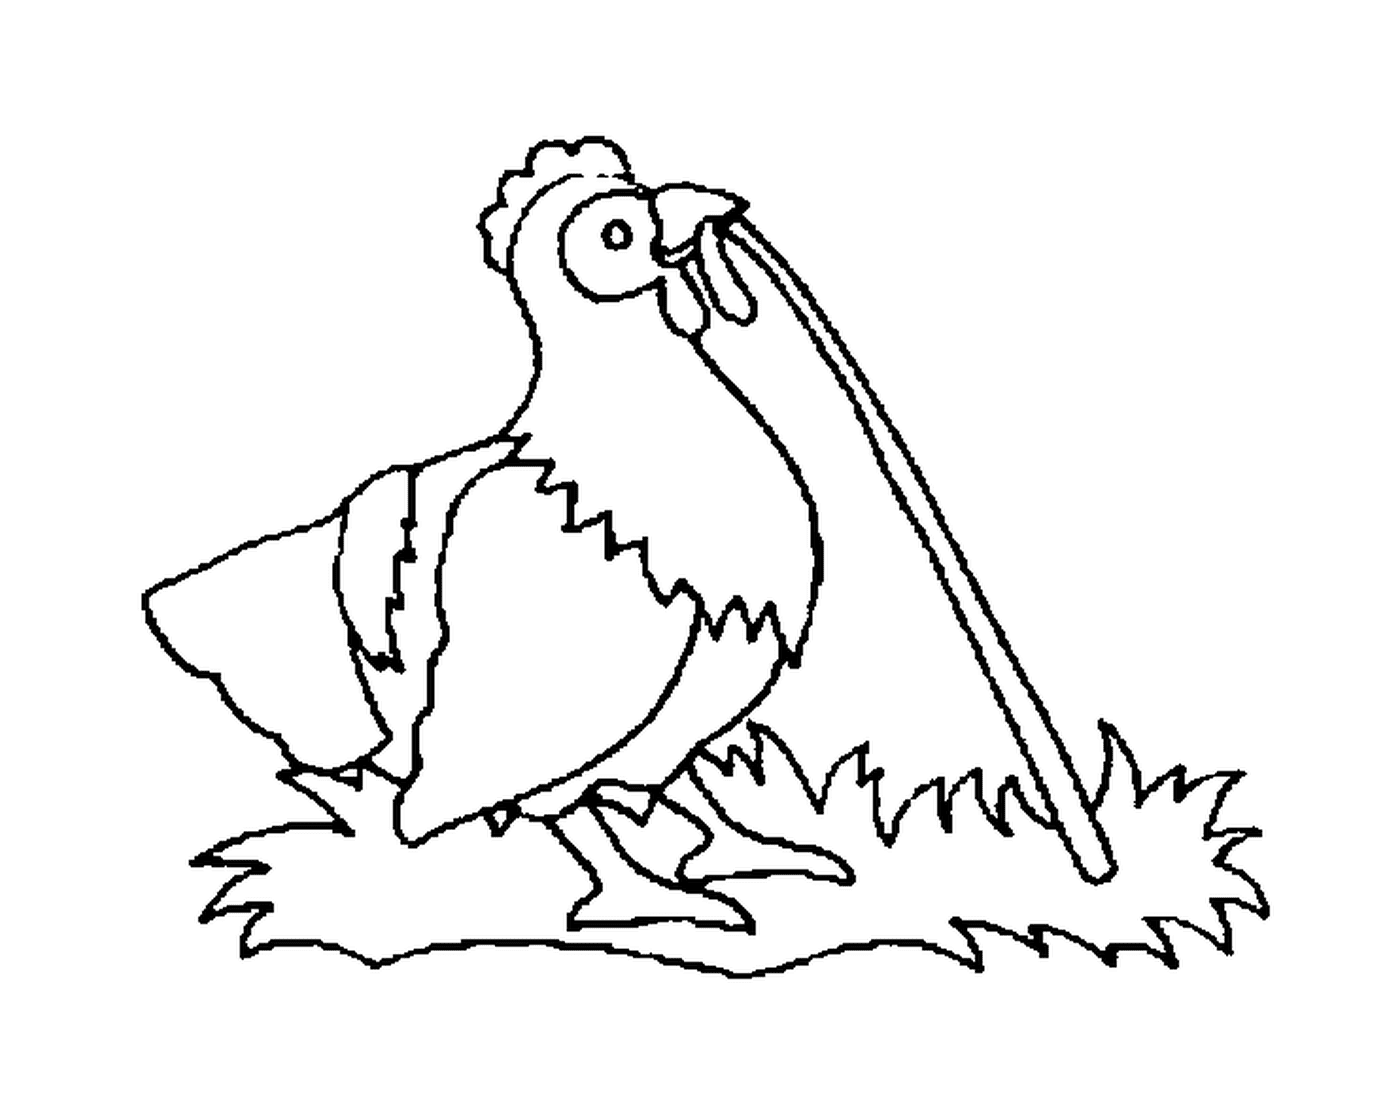  Chicken holds stick mouth 